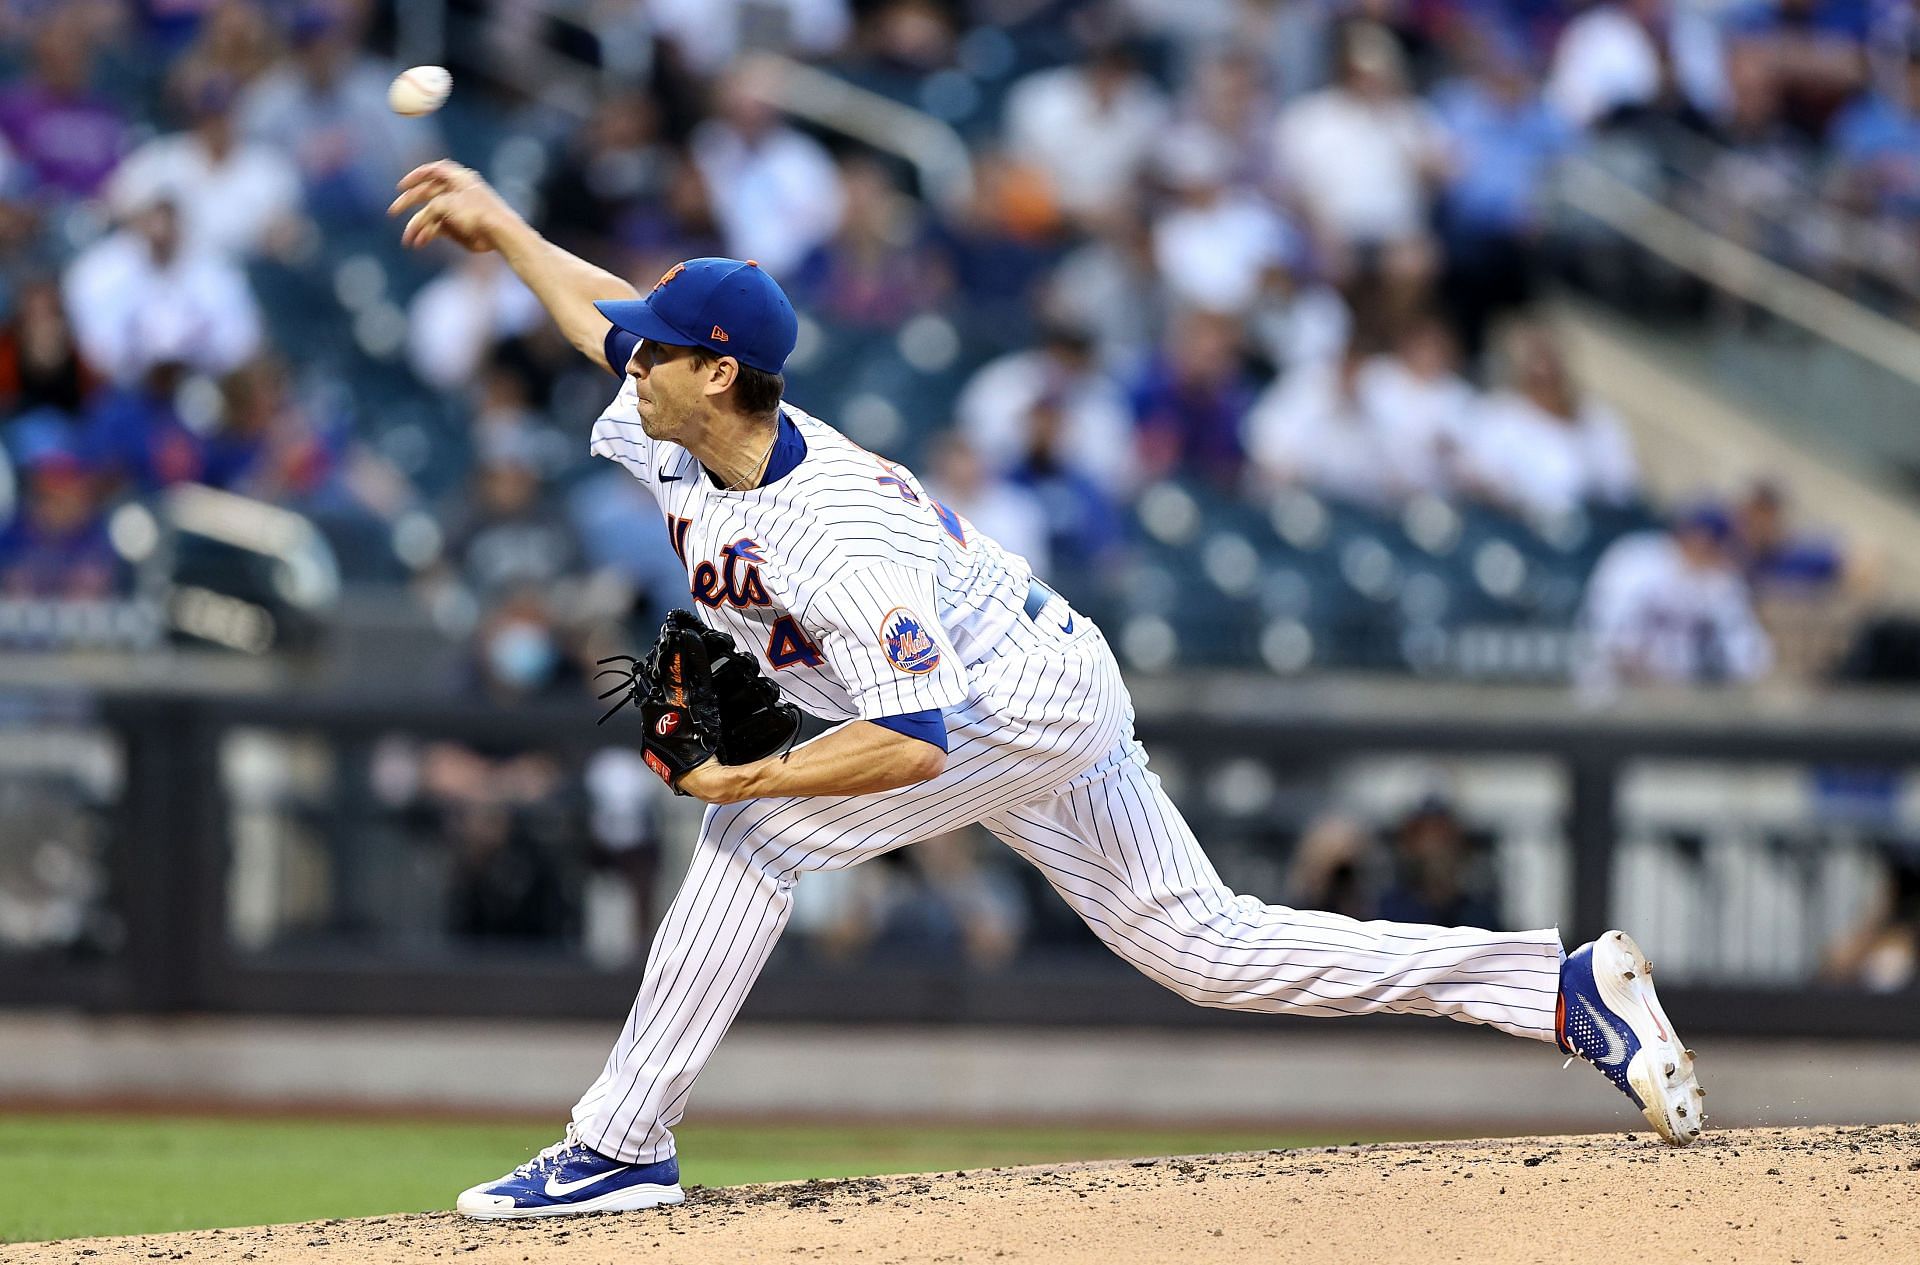 Jacob DeGrom has been the ace of the New York Mets for many years now